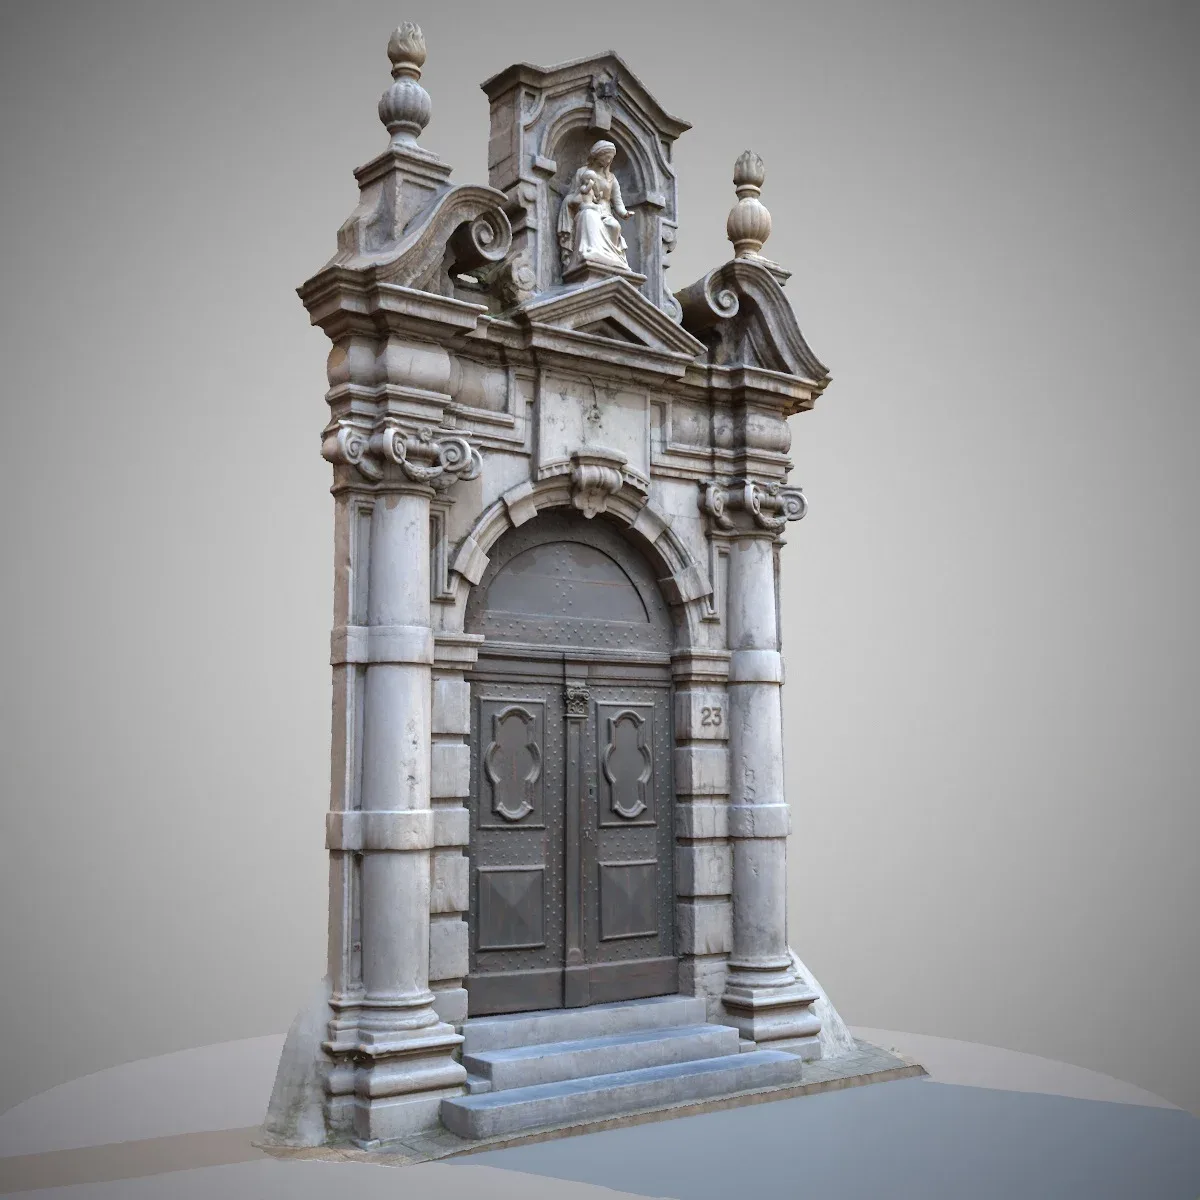 3D Scanned Church Door for Realistic Architectural Visualization and VR Simulations